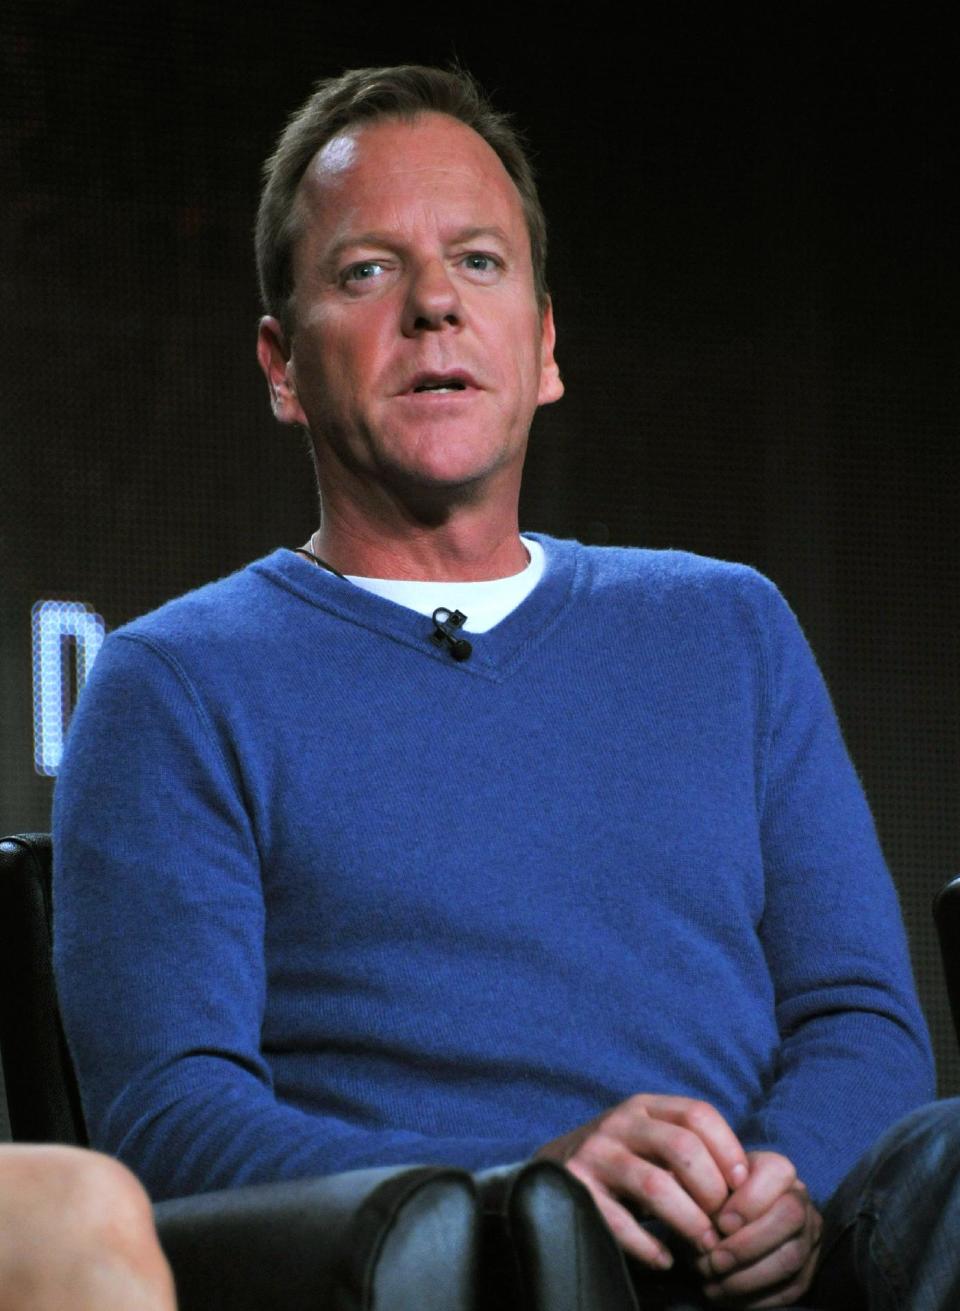 Kiefer Sutherland speaks during the panel for "24: Live Another Day" at the FOX Winter 2014 TCA, on Monday, Jan. 13, 2014, at the Langham Hotel in Pasadena, Calif. (Photo by Richard Shotwell/Invision/AP)